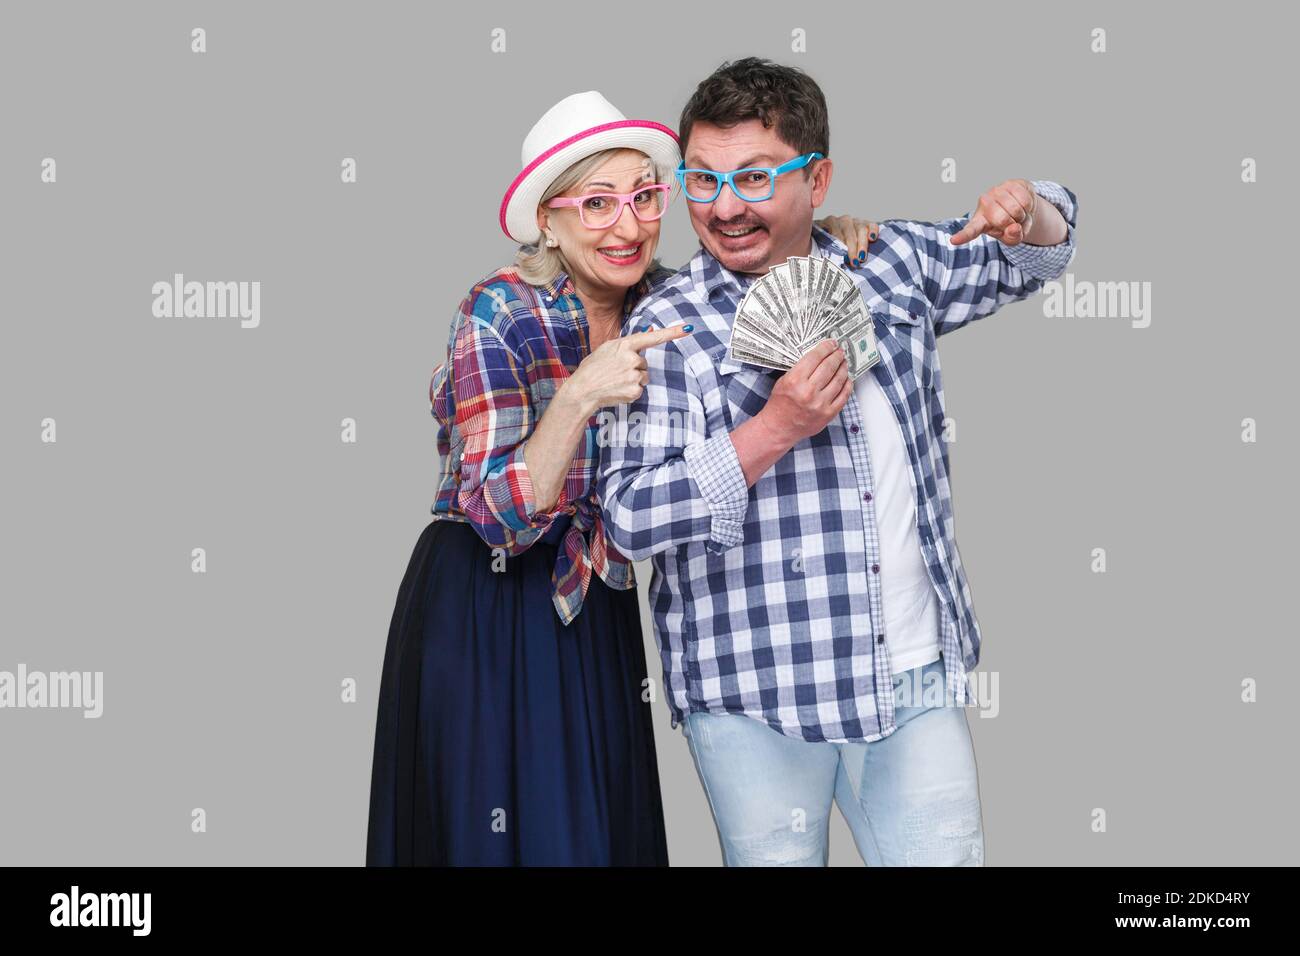 Happy wealthy family, adult man and woman in casual checkered shirt standing pickaback together, holding fan of dollar and pointing finger to money. I Stock Photo